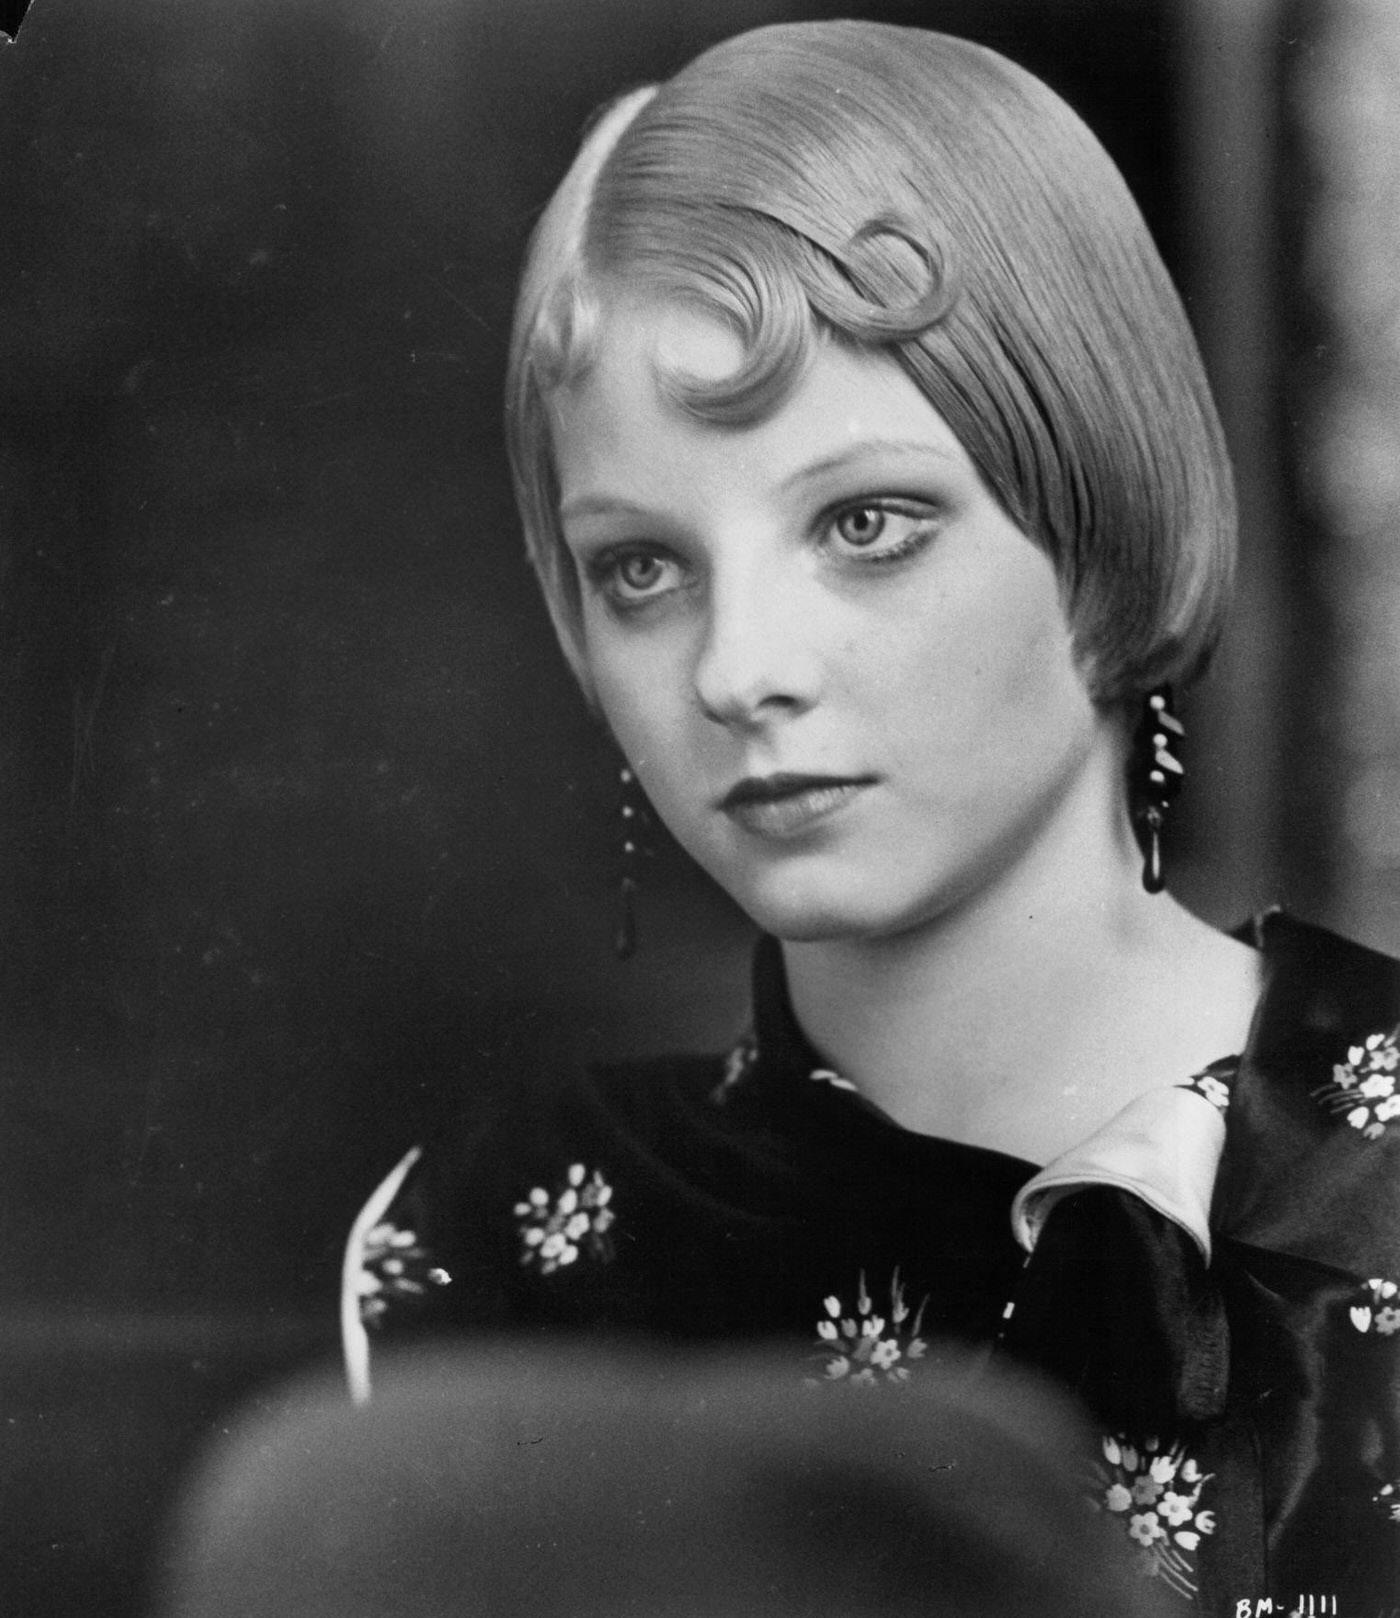 Jodie Foster as the tantalizing vamp of the chorus in 'Bugsy Malone', 1976.